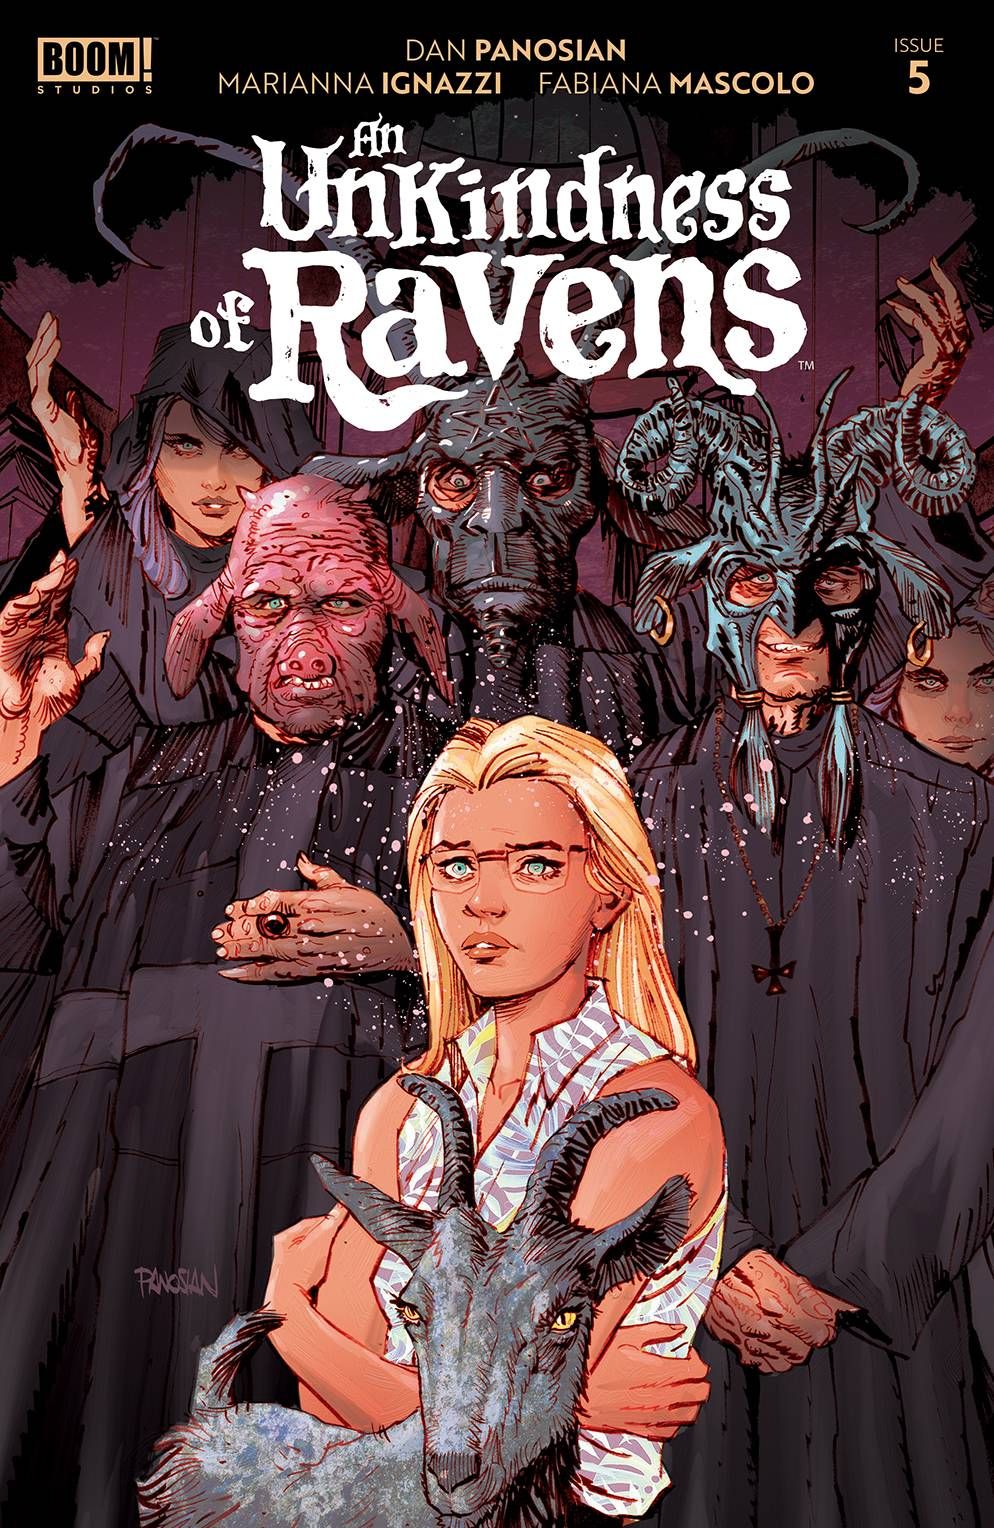 An Unkindness of Ravens #5 Comic